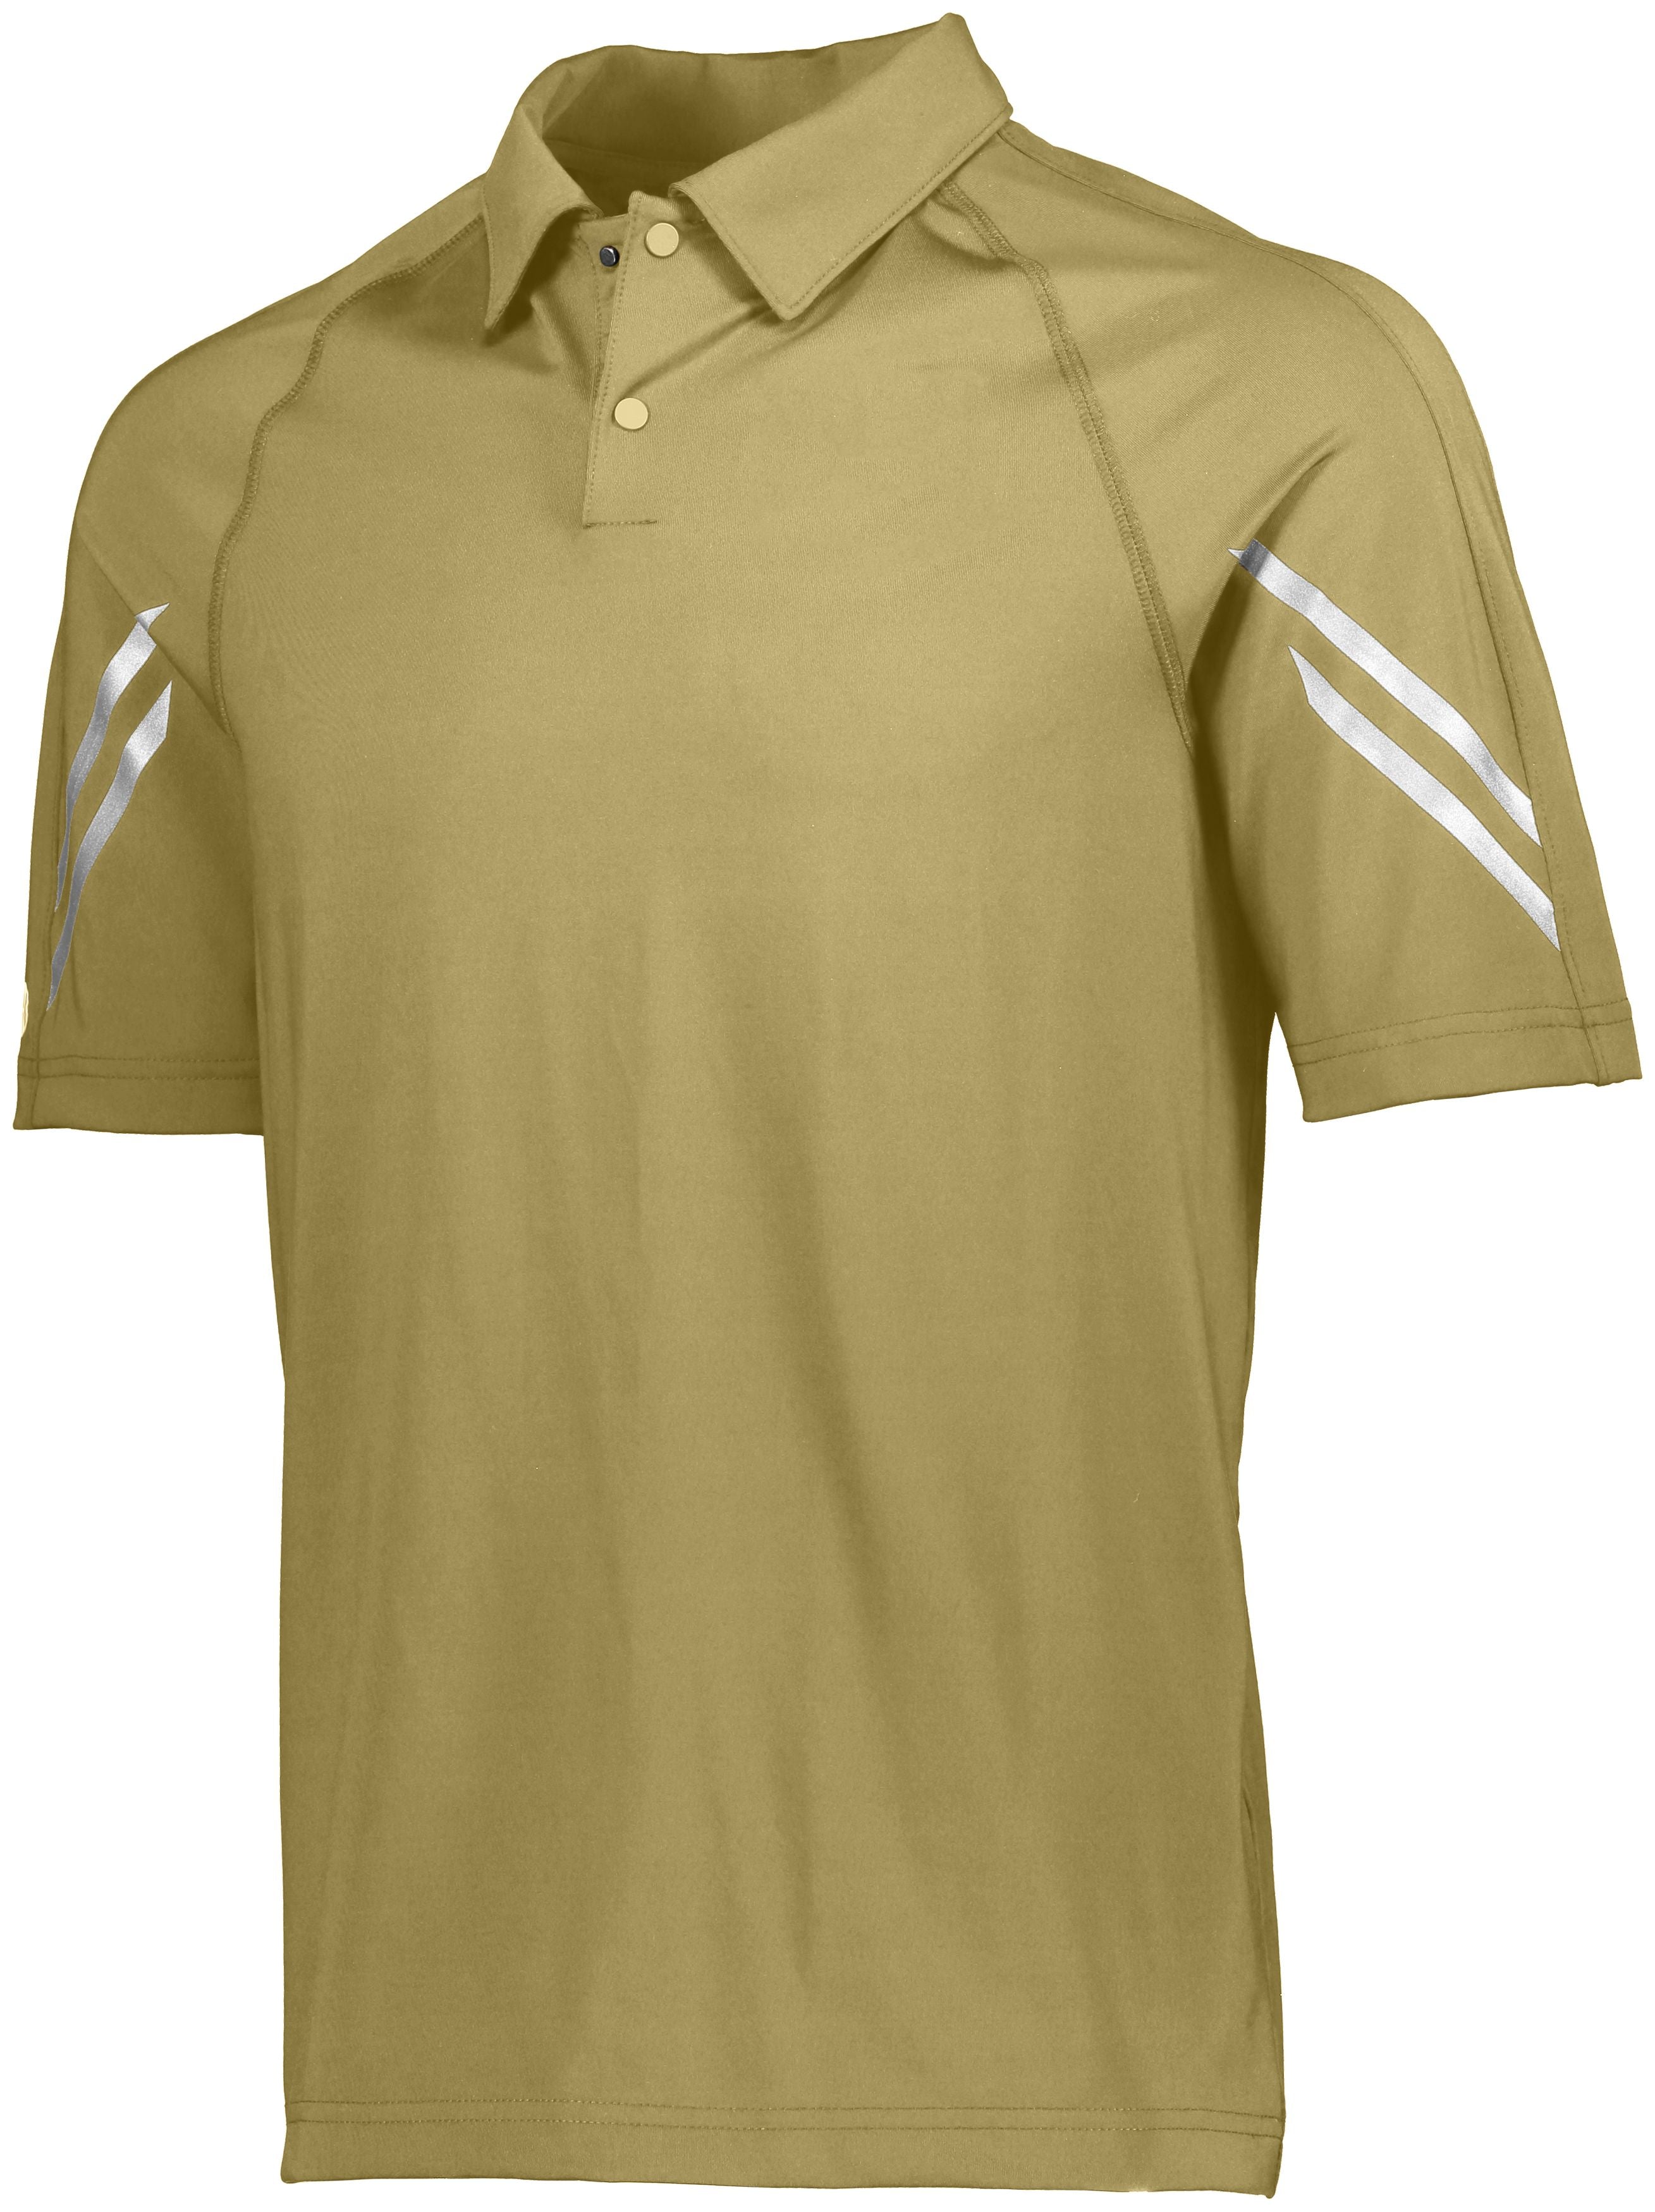 Holloway Flux Polo in Vegas Gold  -Part of the Adult, Adult-Polos, Polos, Holloway, Shirts, Flux-Collection, Corporate-Collection product lines at KanaleyCreations.com